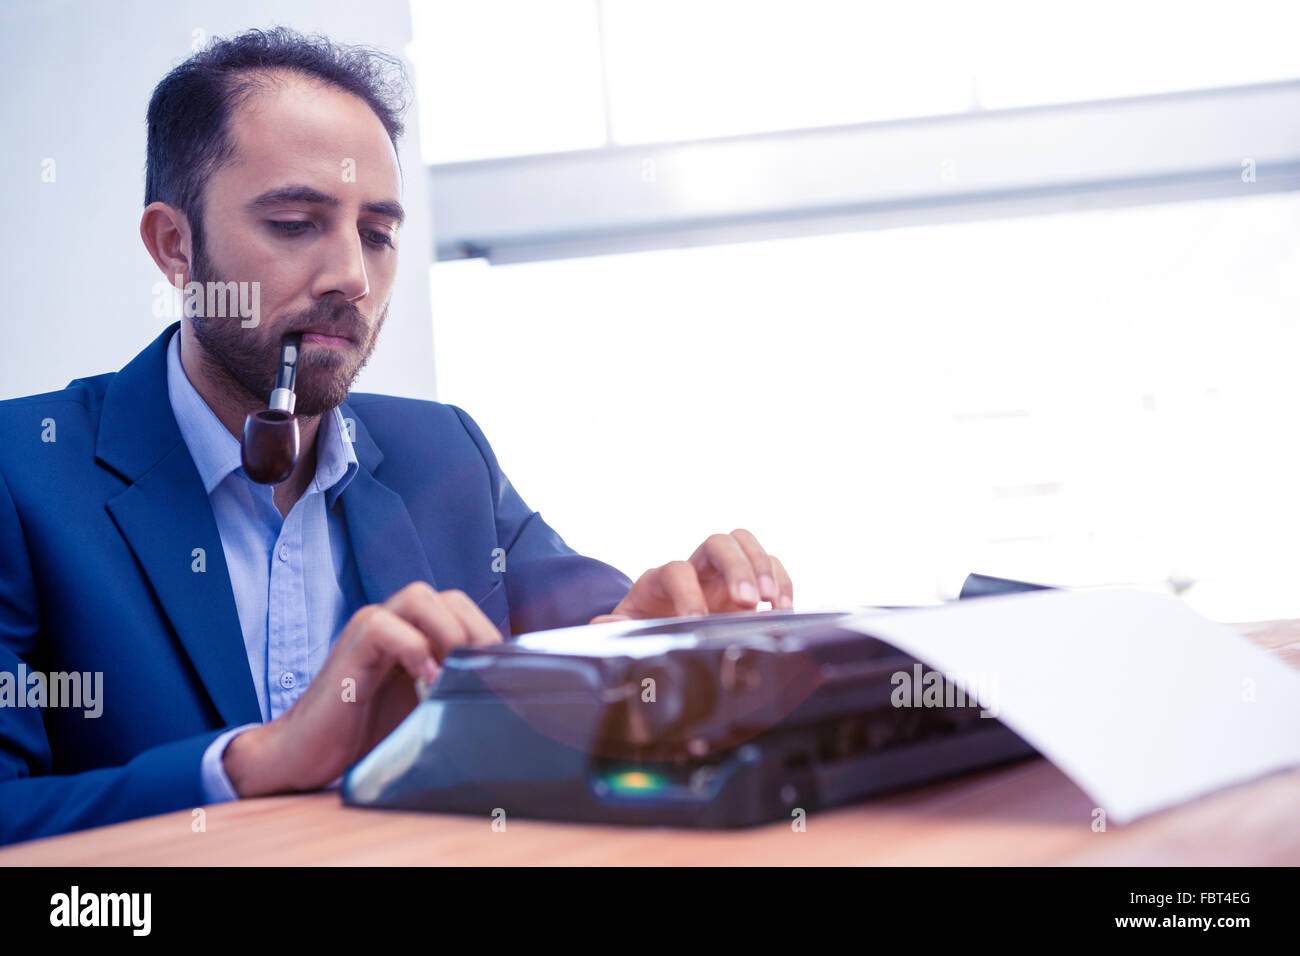 Hipster businessman working on typewriter in office Stock Photo